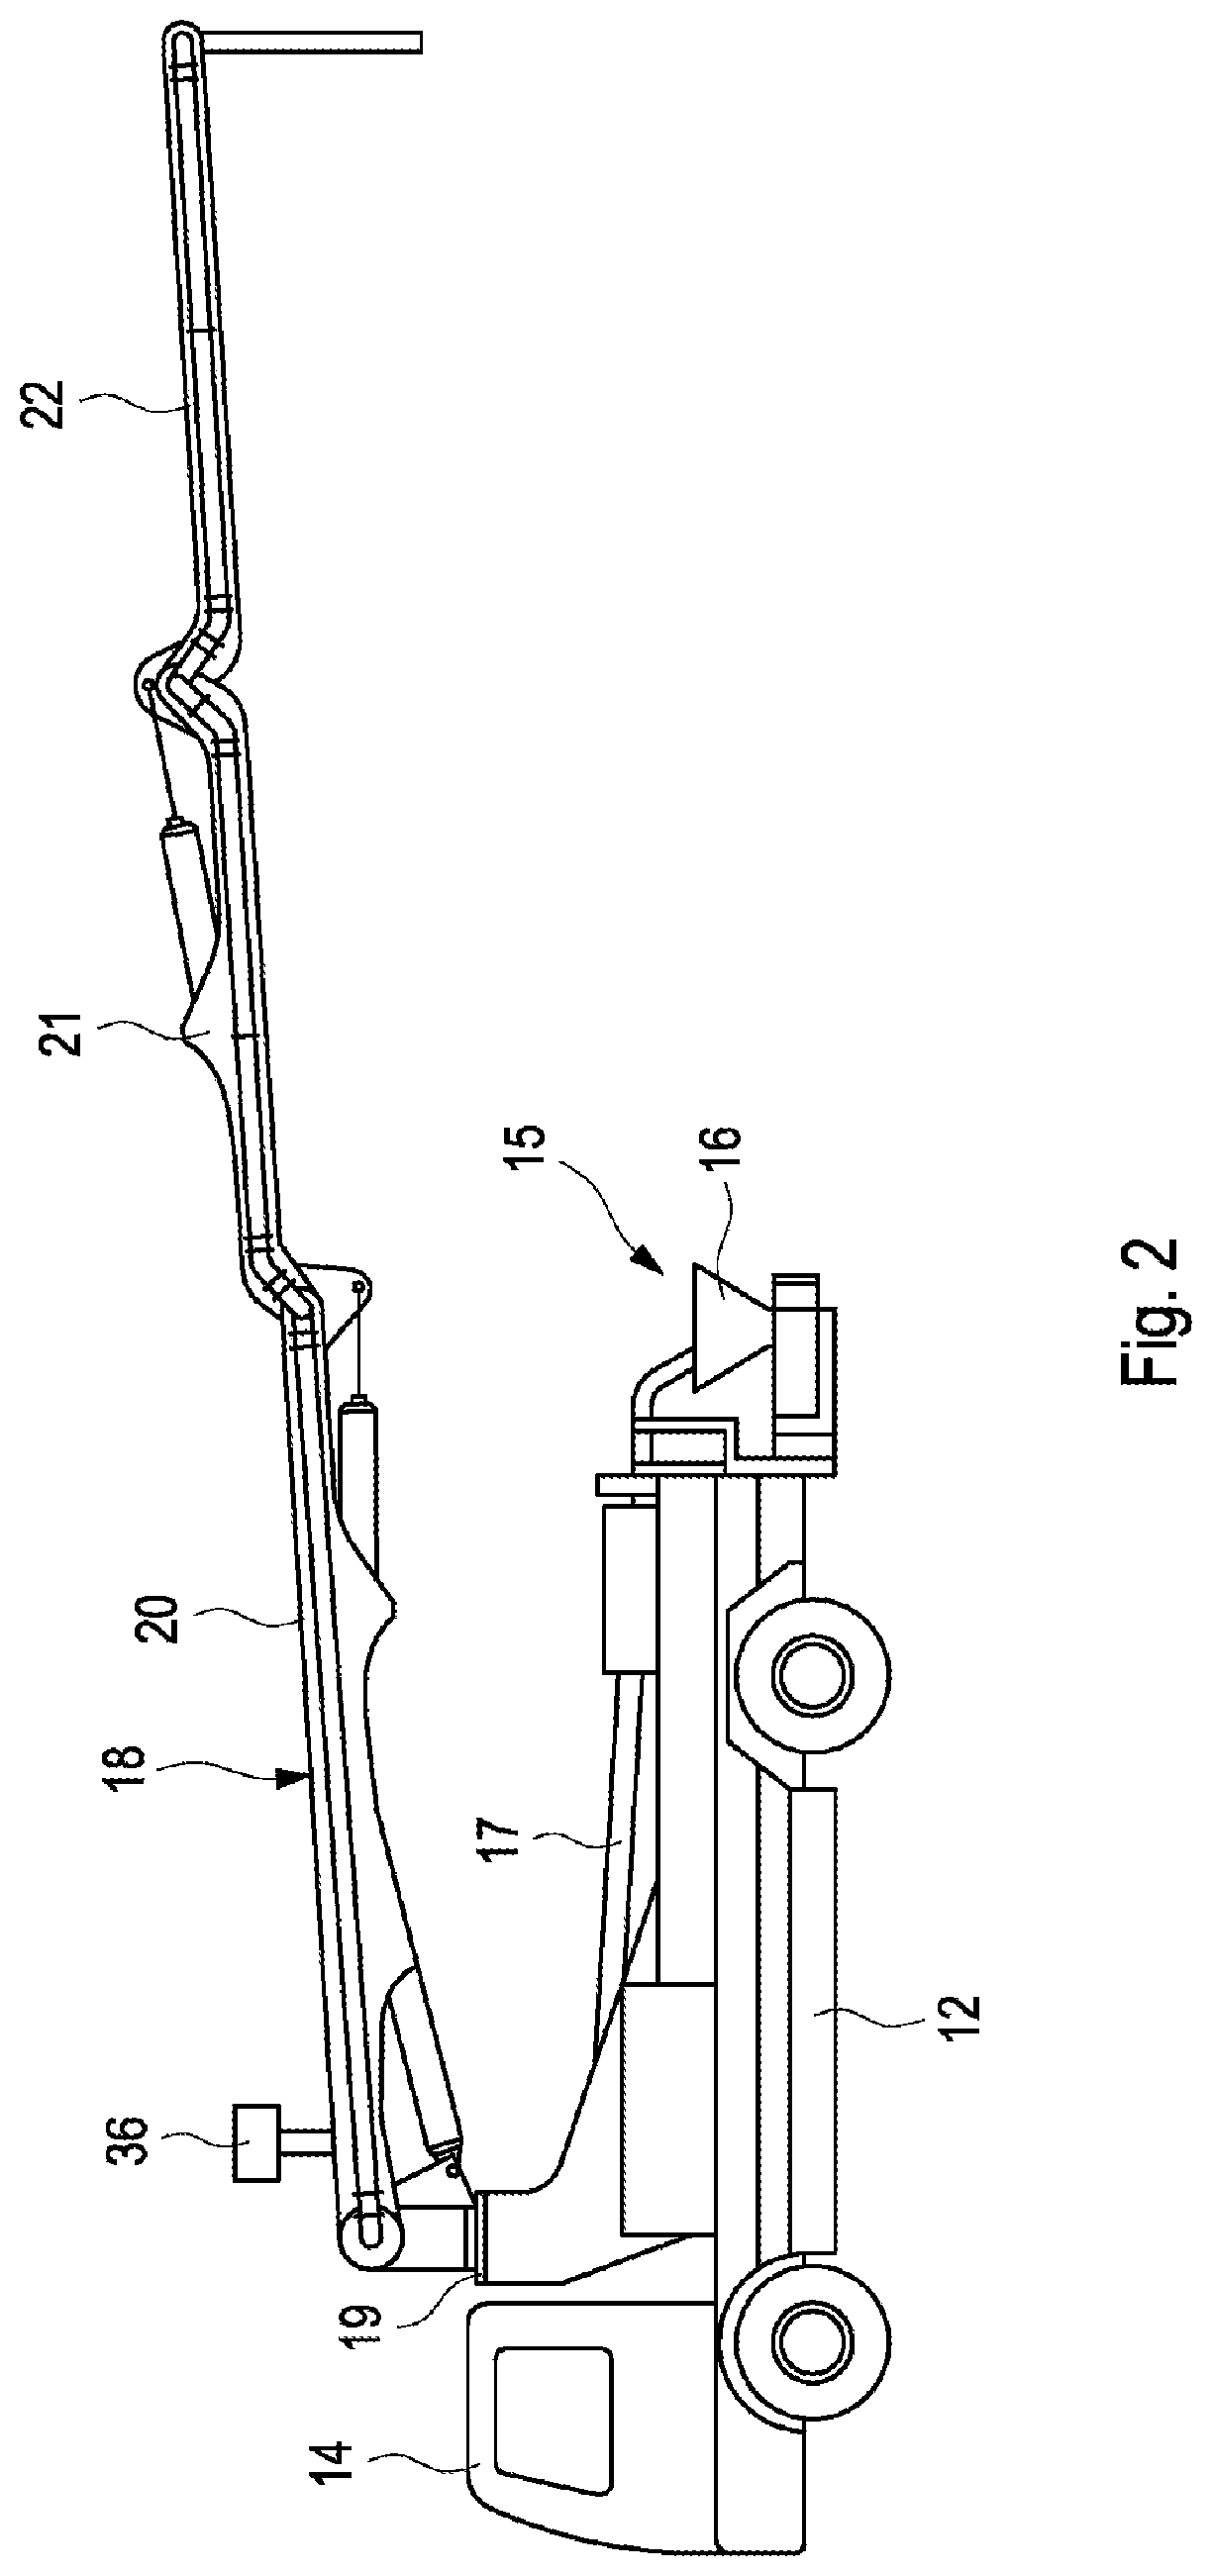 Concrete pump and method for supporting a concrete pump